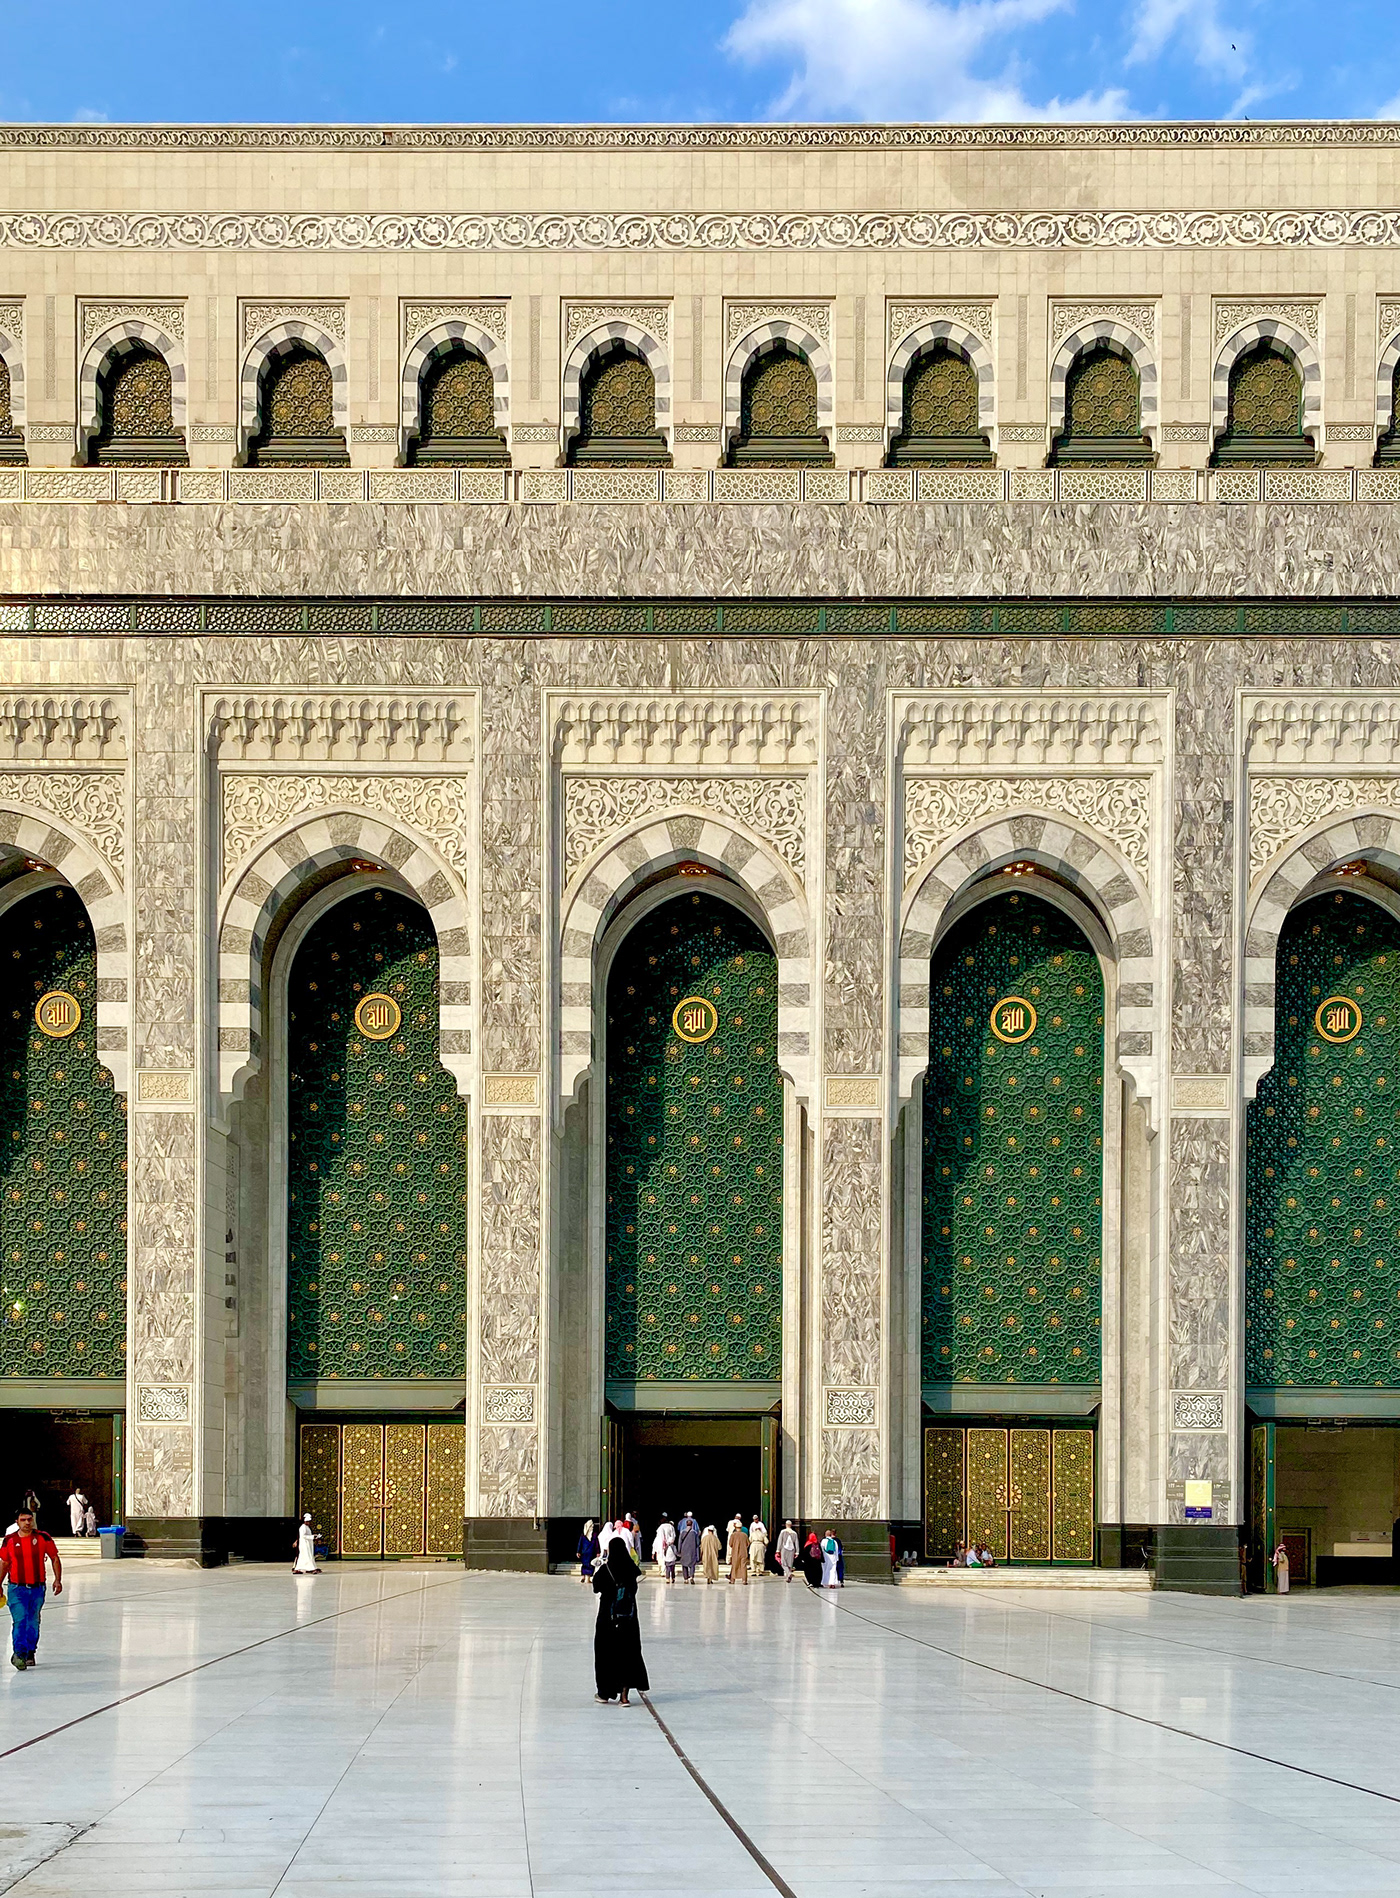 archticture photography gate islam islamic islamicarchitecture makkah mobilephotography muslim photos arches architectural architecture pattern Patterns green hijab hijabi mosque Mosques patterned minimal